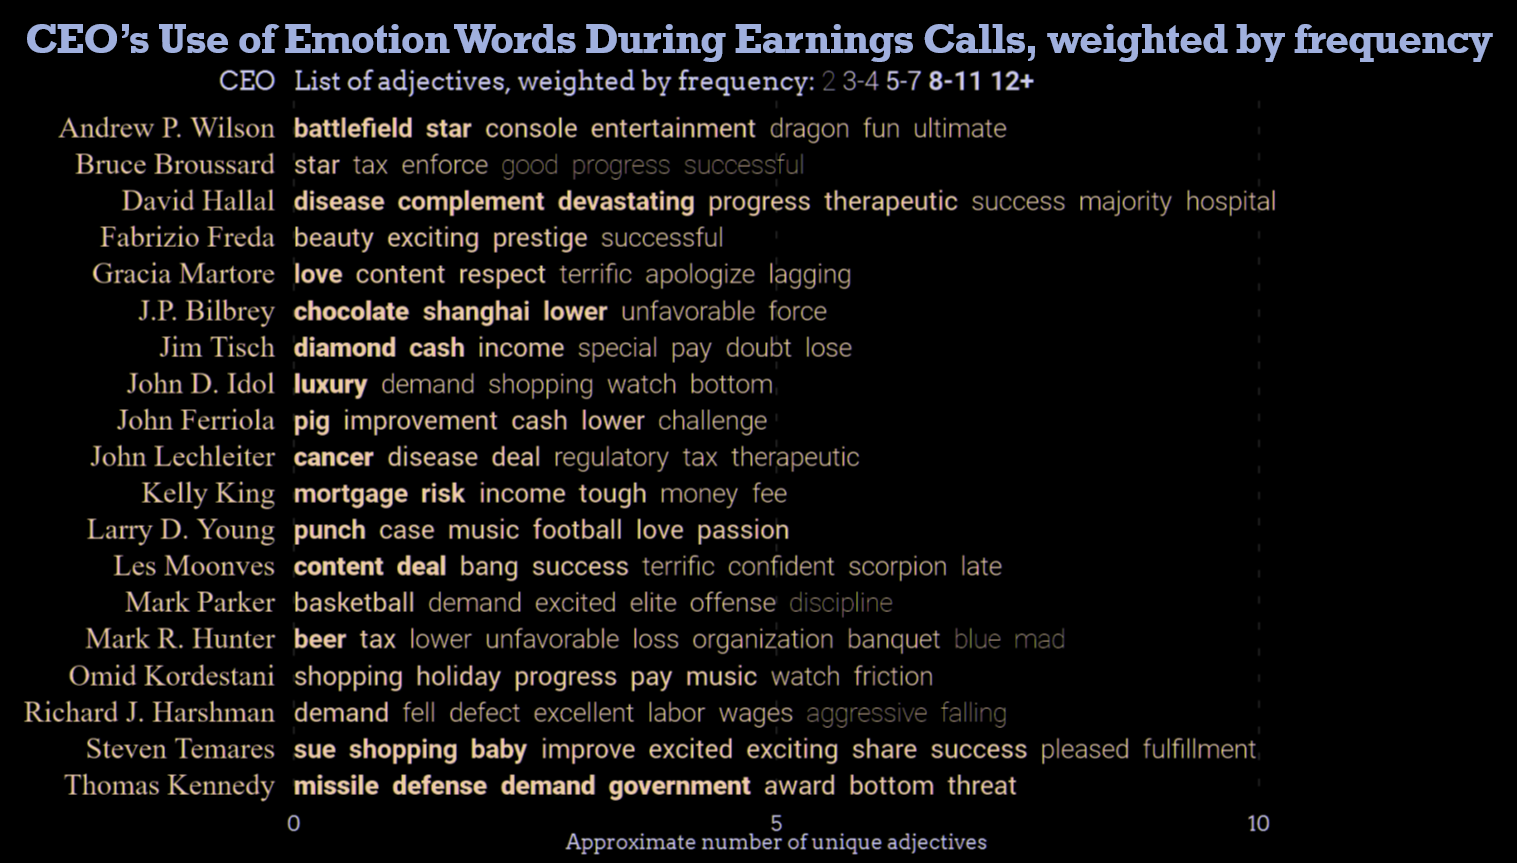 List of unique emotion words weighted by frequency